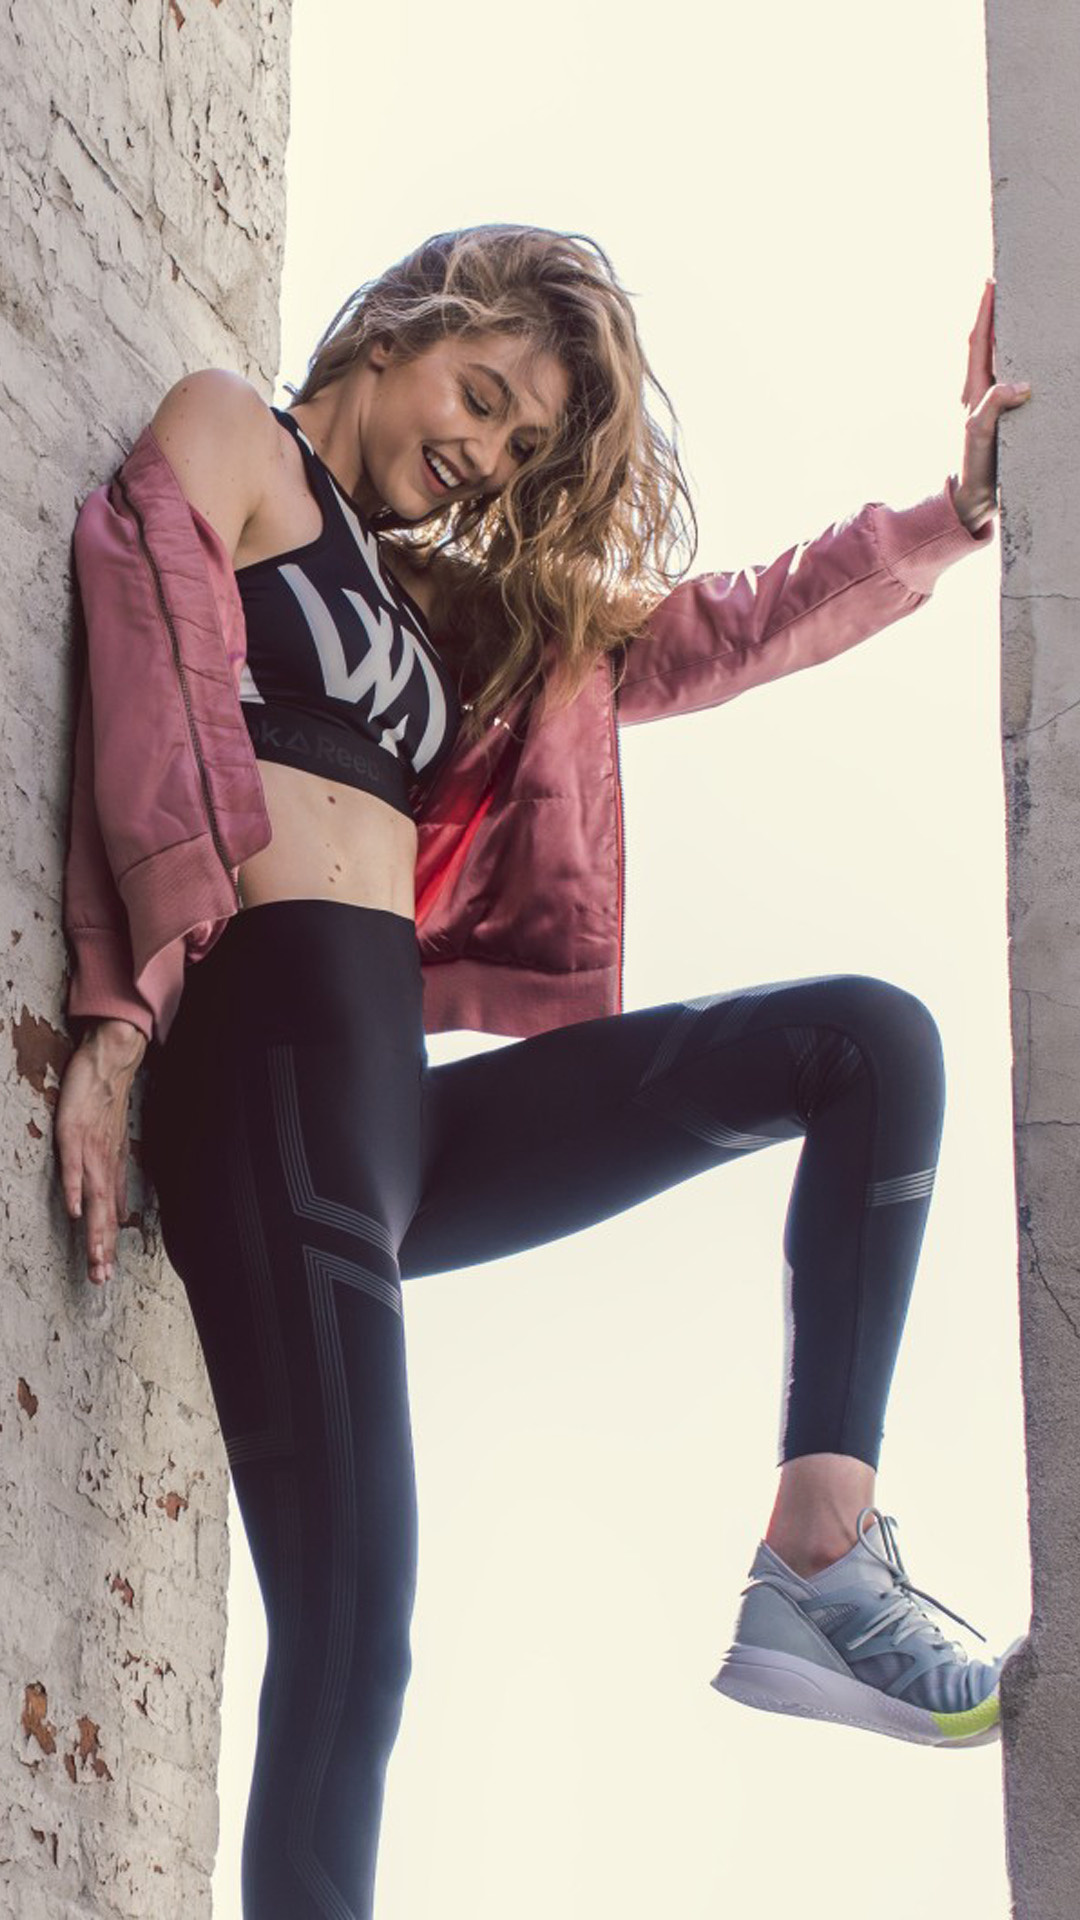 Reebok: Gigi Hadid, A model-sportswear collaboration, The face of sneaker and activewear brand. 1080x1920 Full HD Wallpaper.